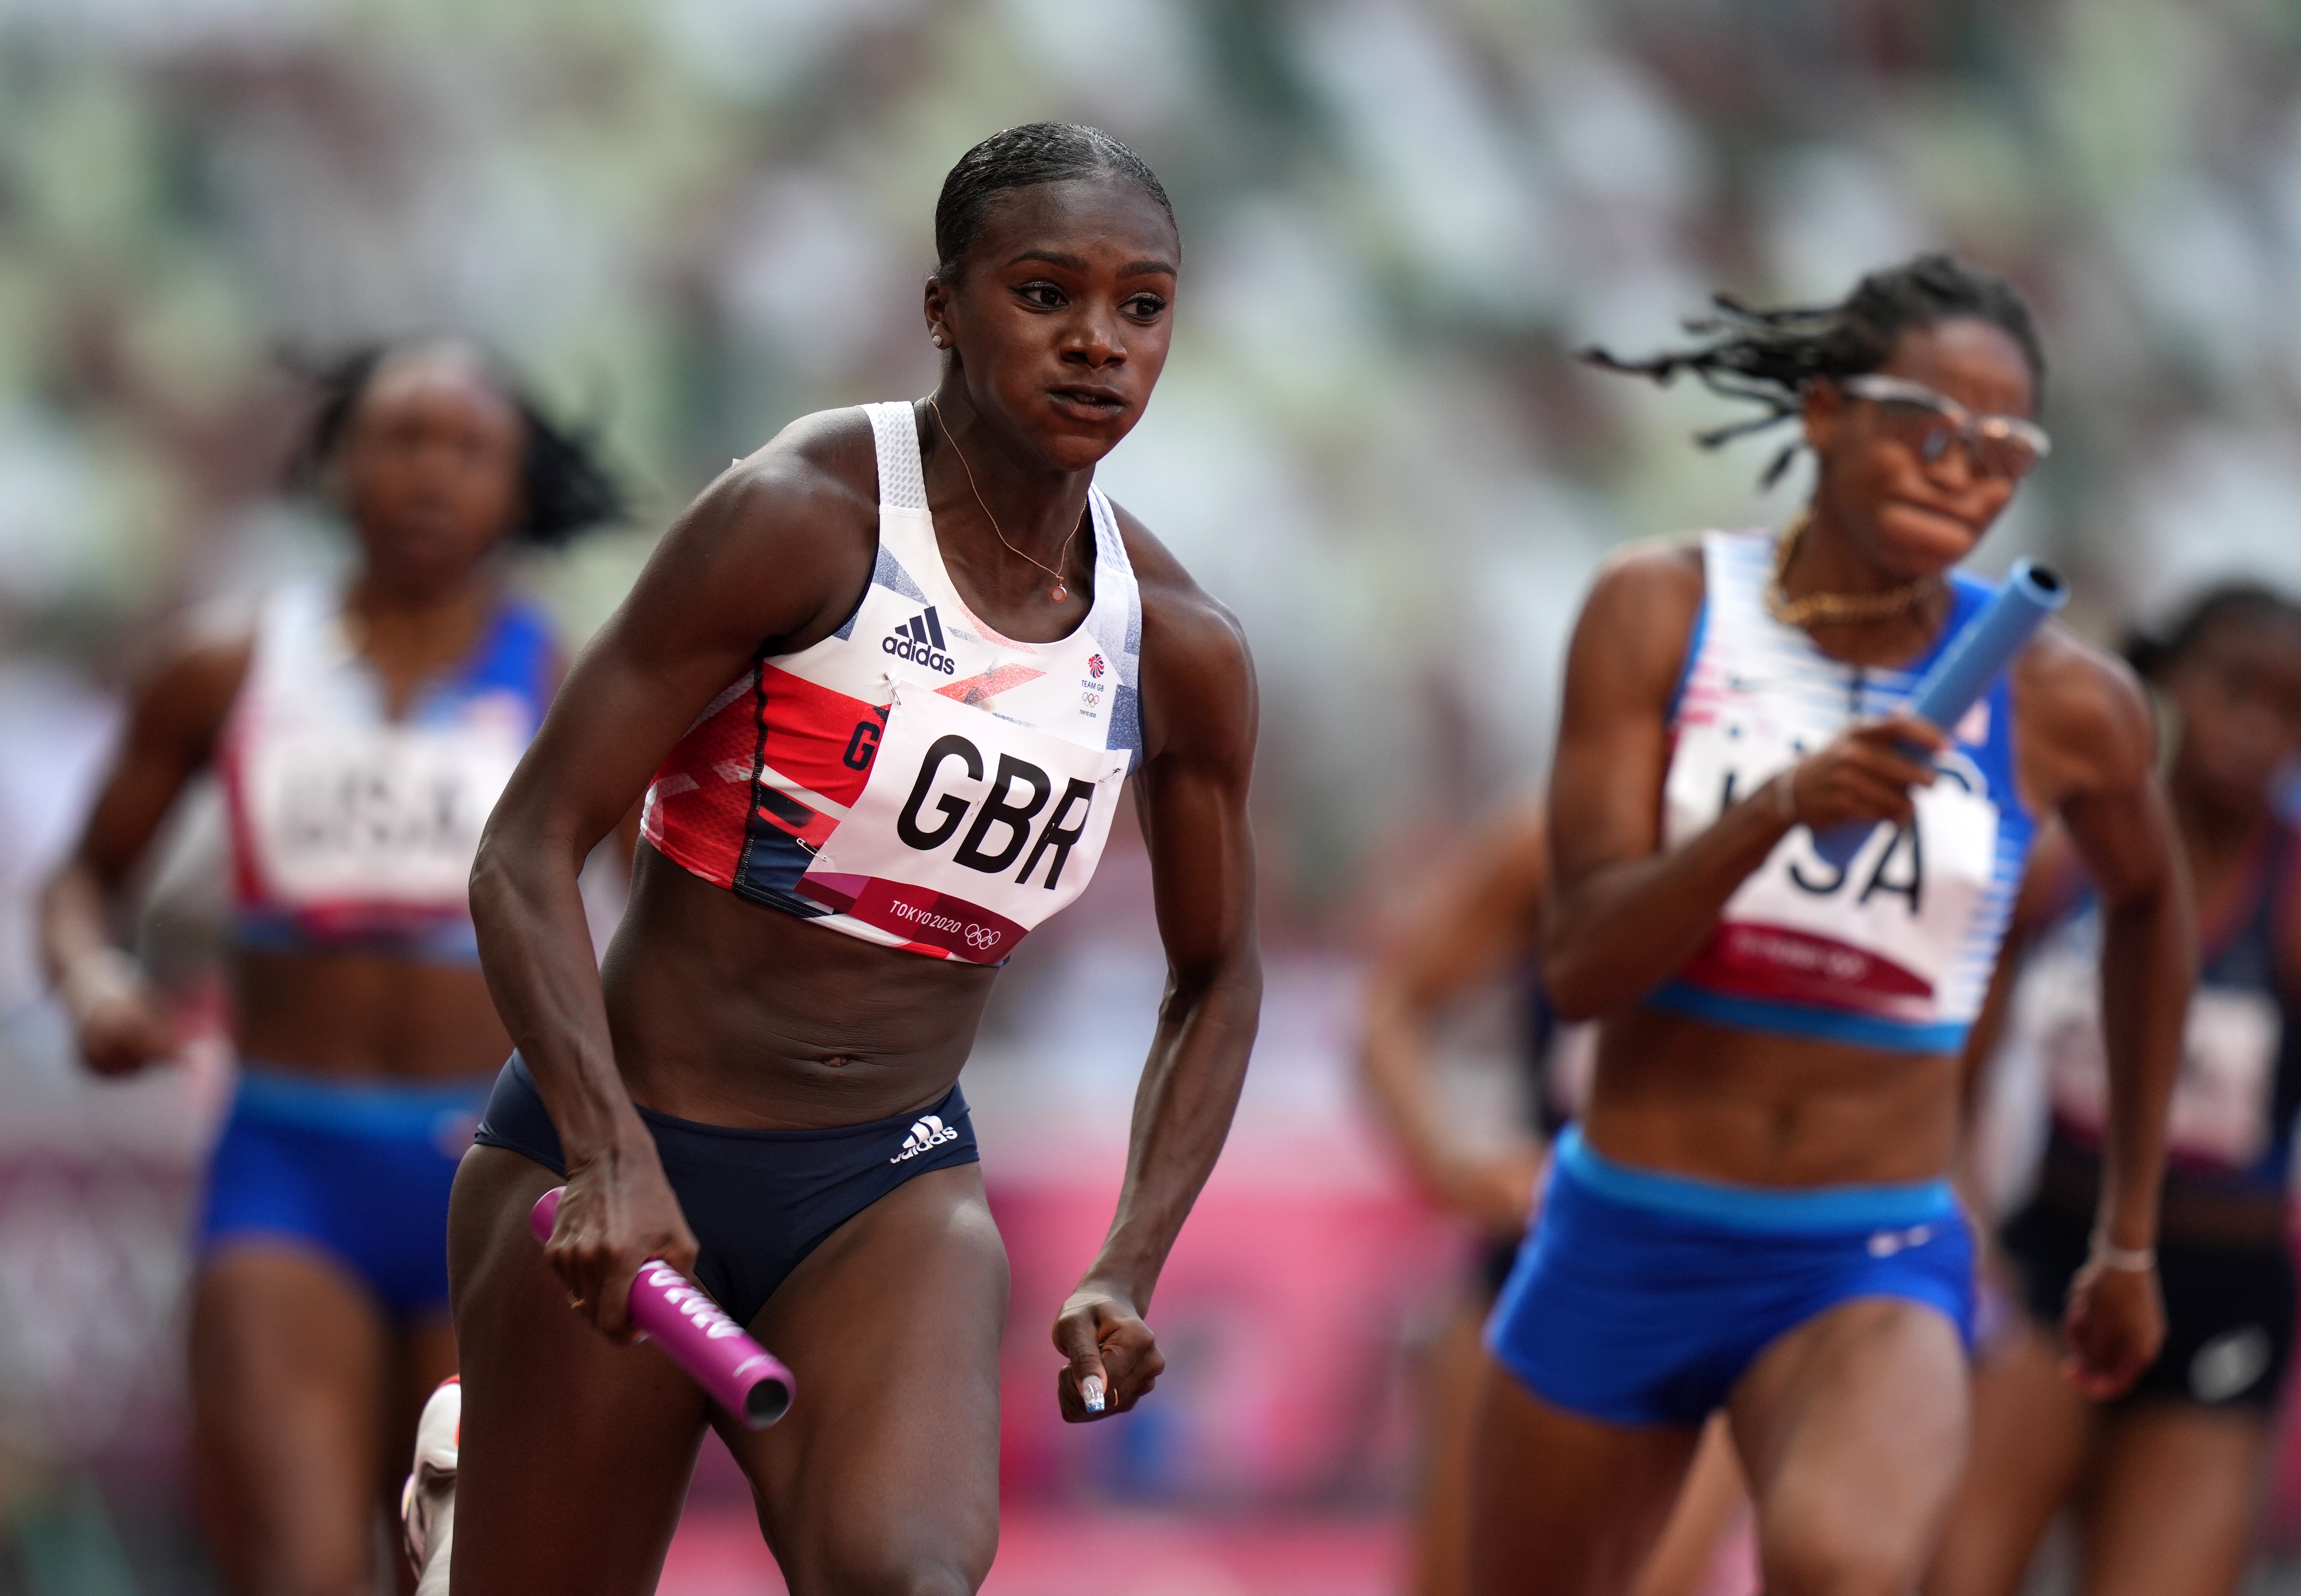 Dina Asher-Smith (left) had to settle for a 4x100m relay bronze in Tokyo after a pre-Games injury wrecked hopes of 100m and 200m success but will be gunning for gold at Paris 2024 (Joe Giddens/PA)